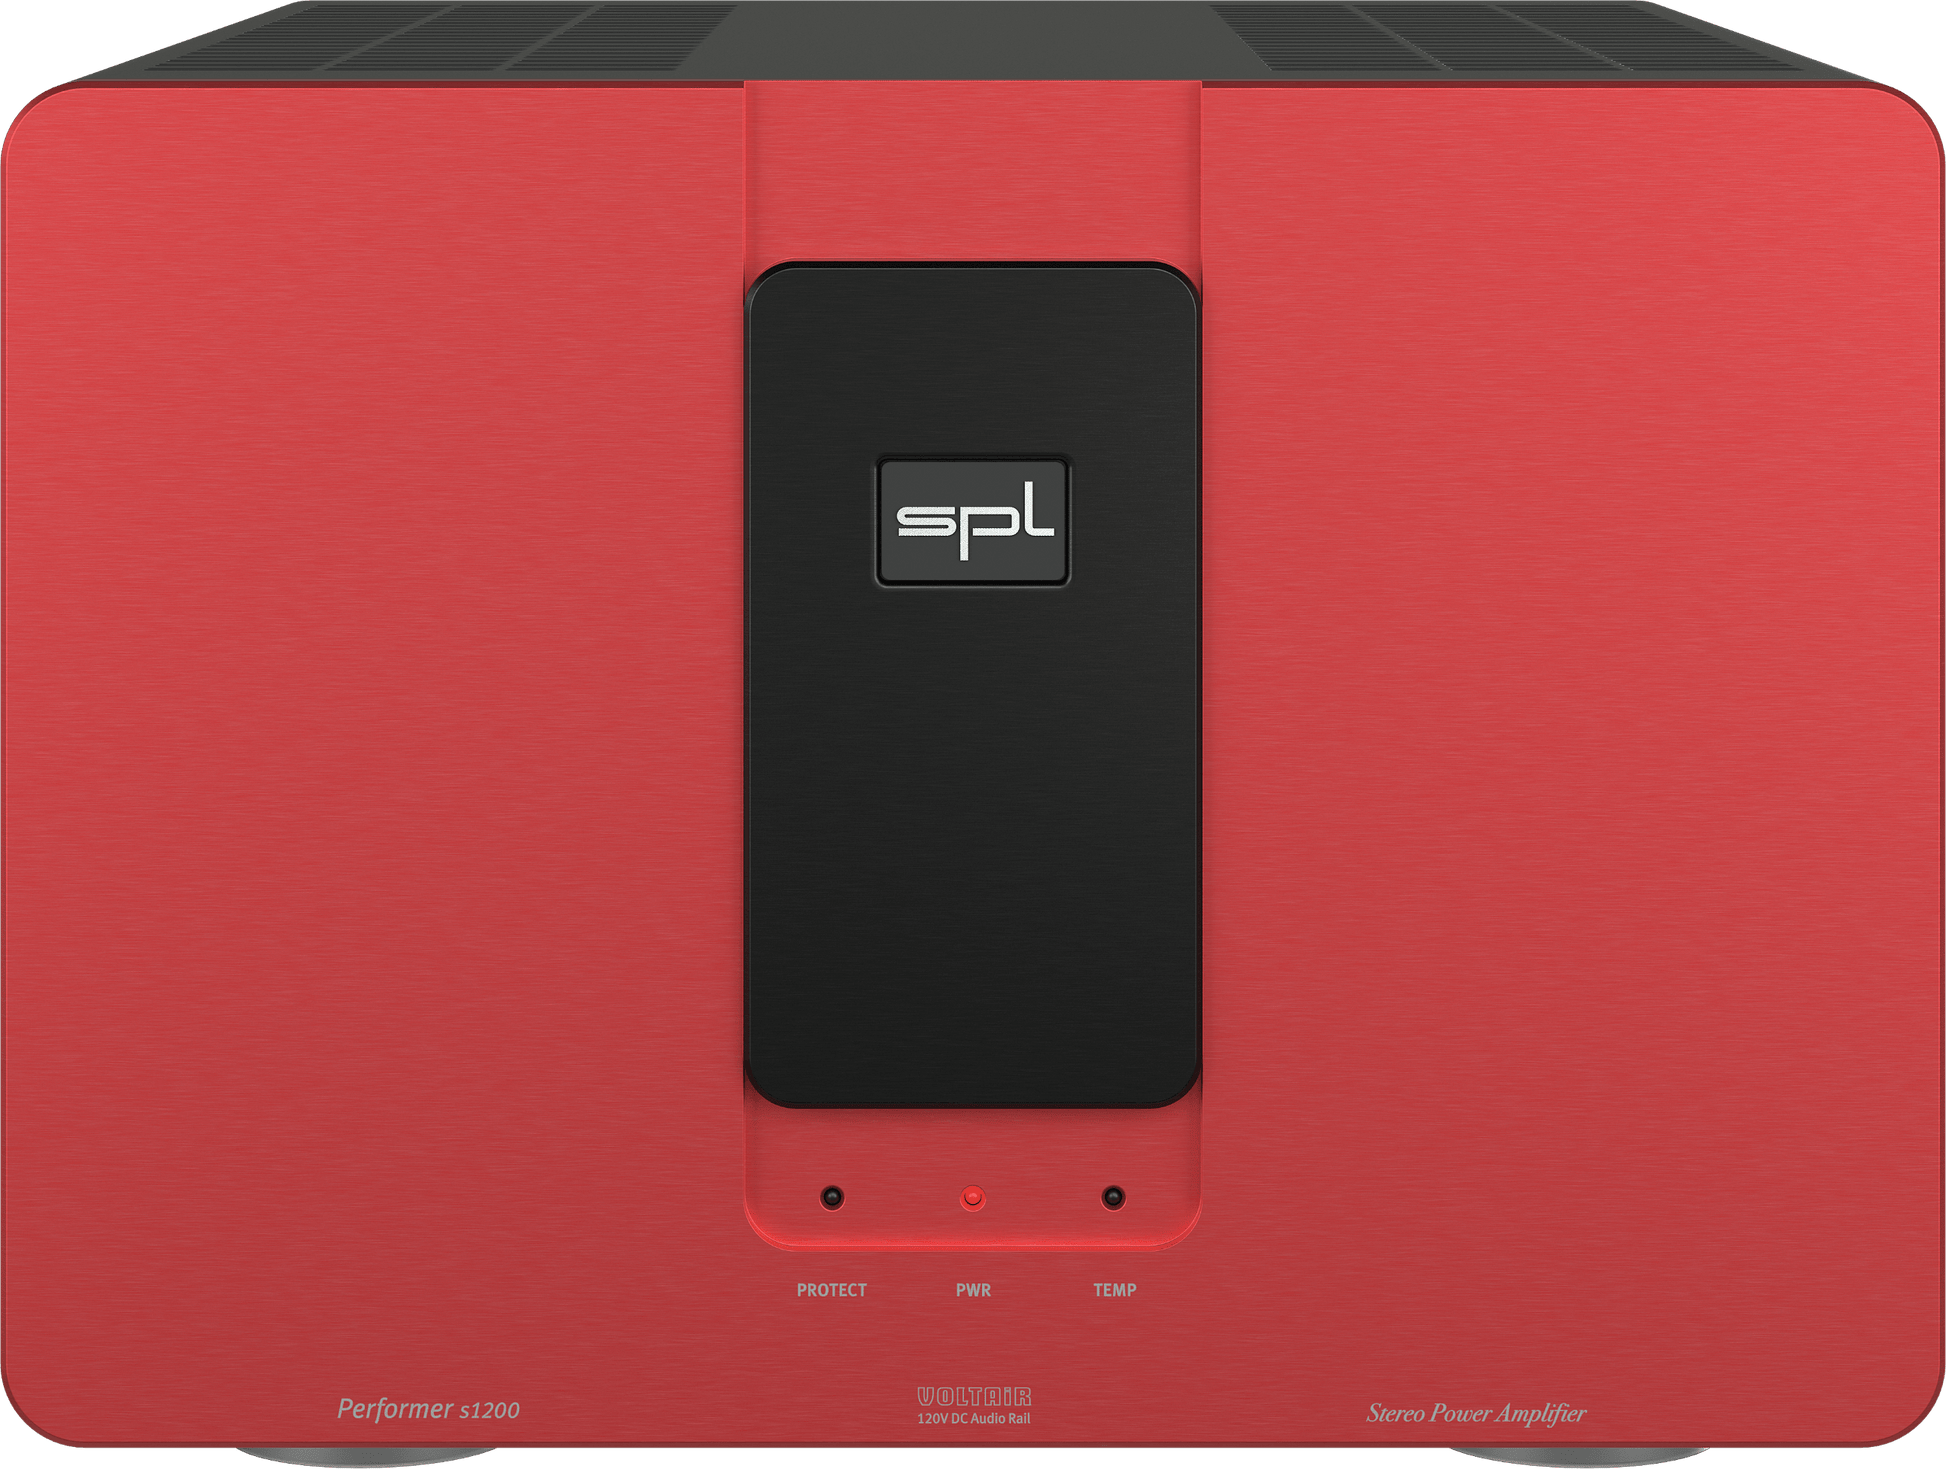 SPL Audio Performer s1200 Stereo Power Amplifier in red with black insert